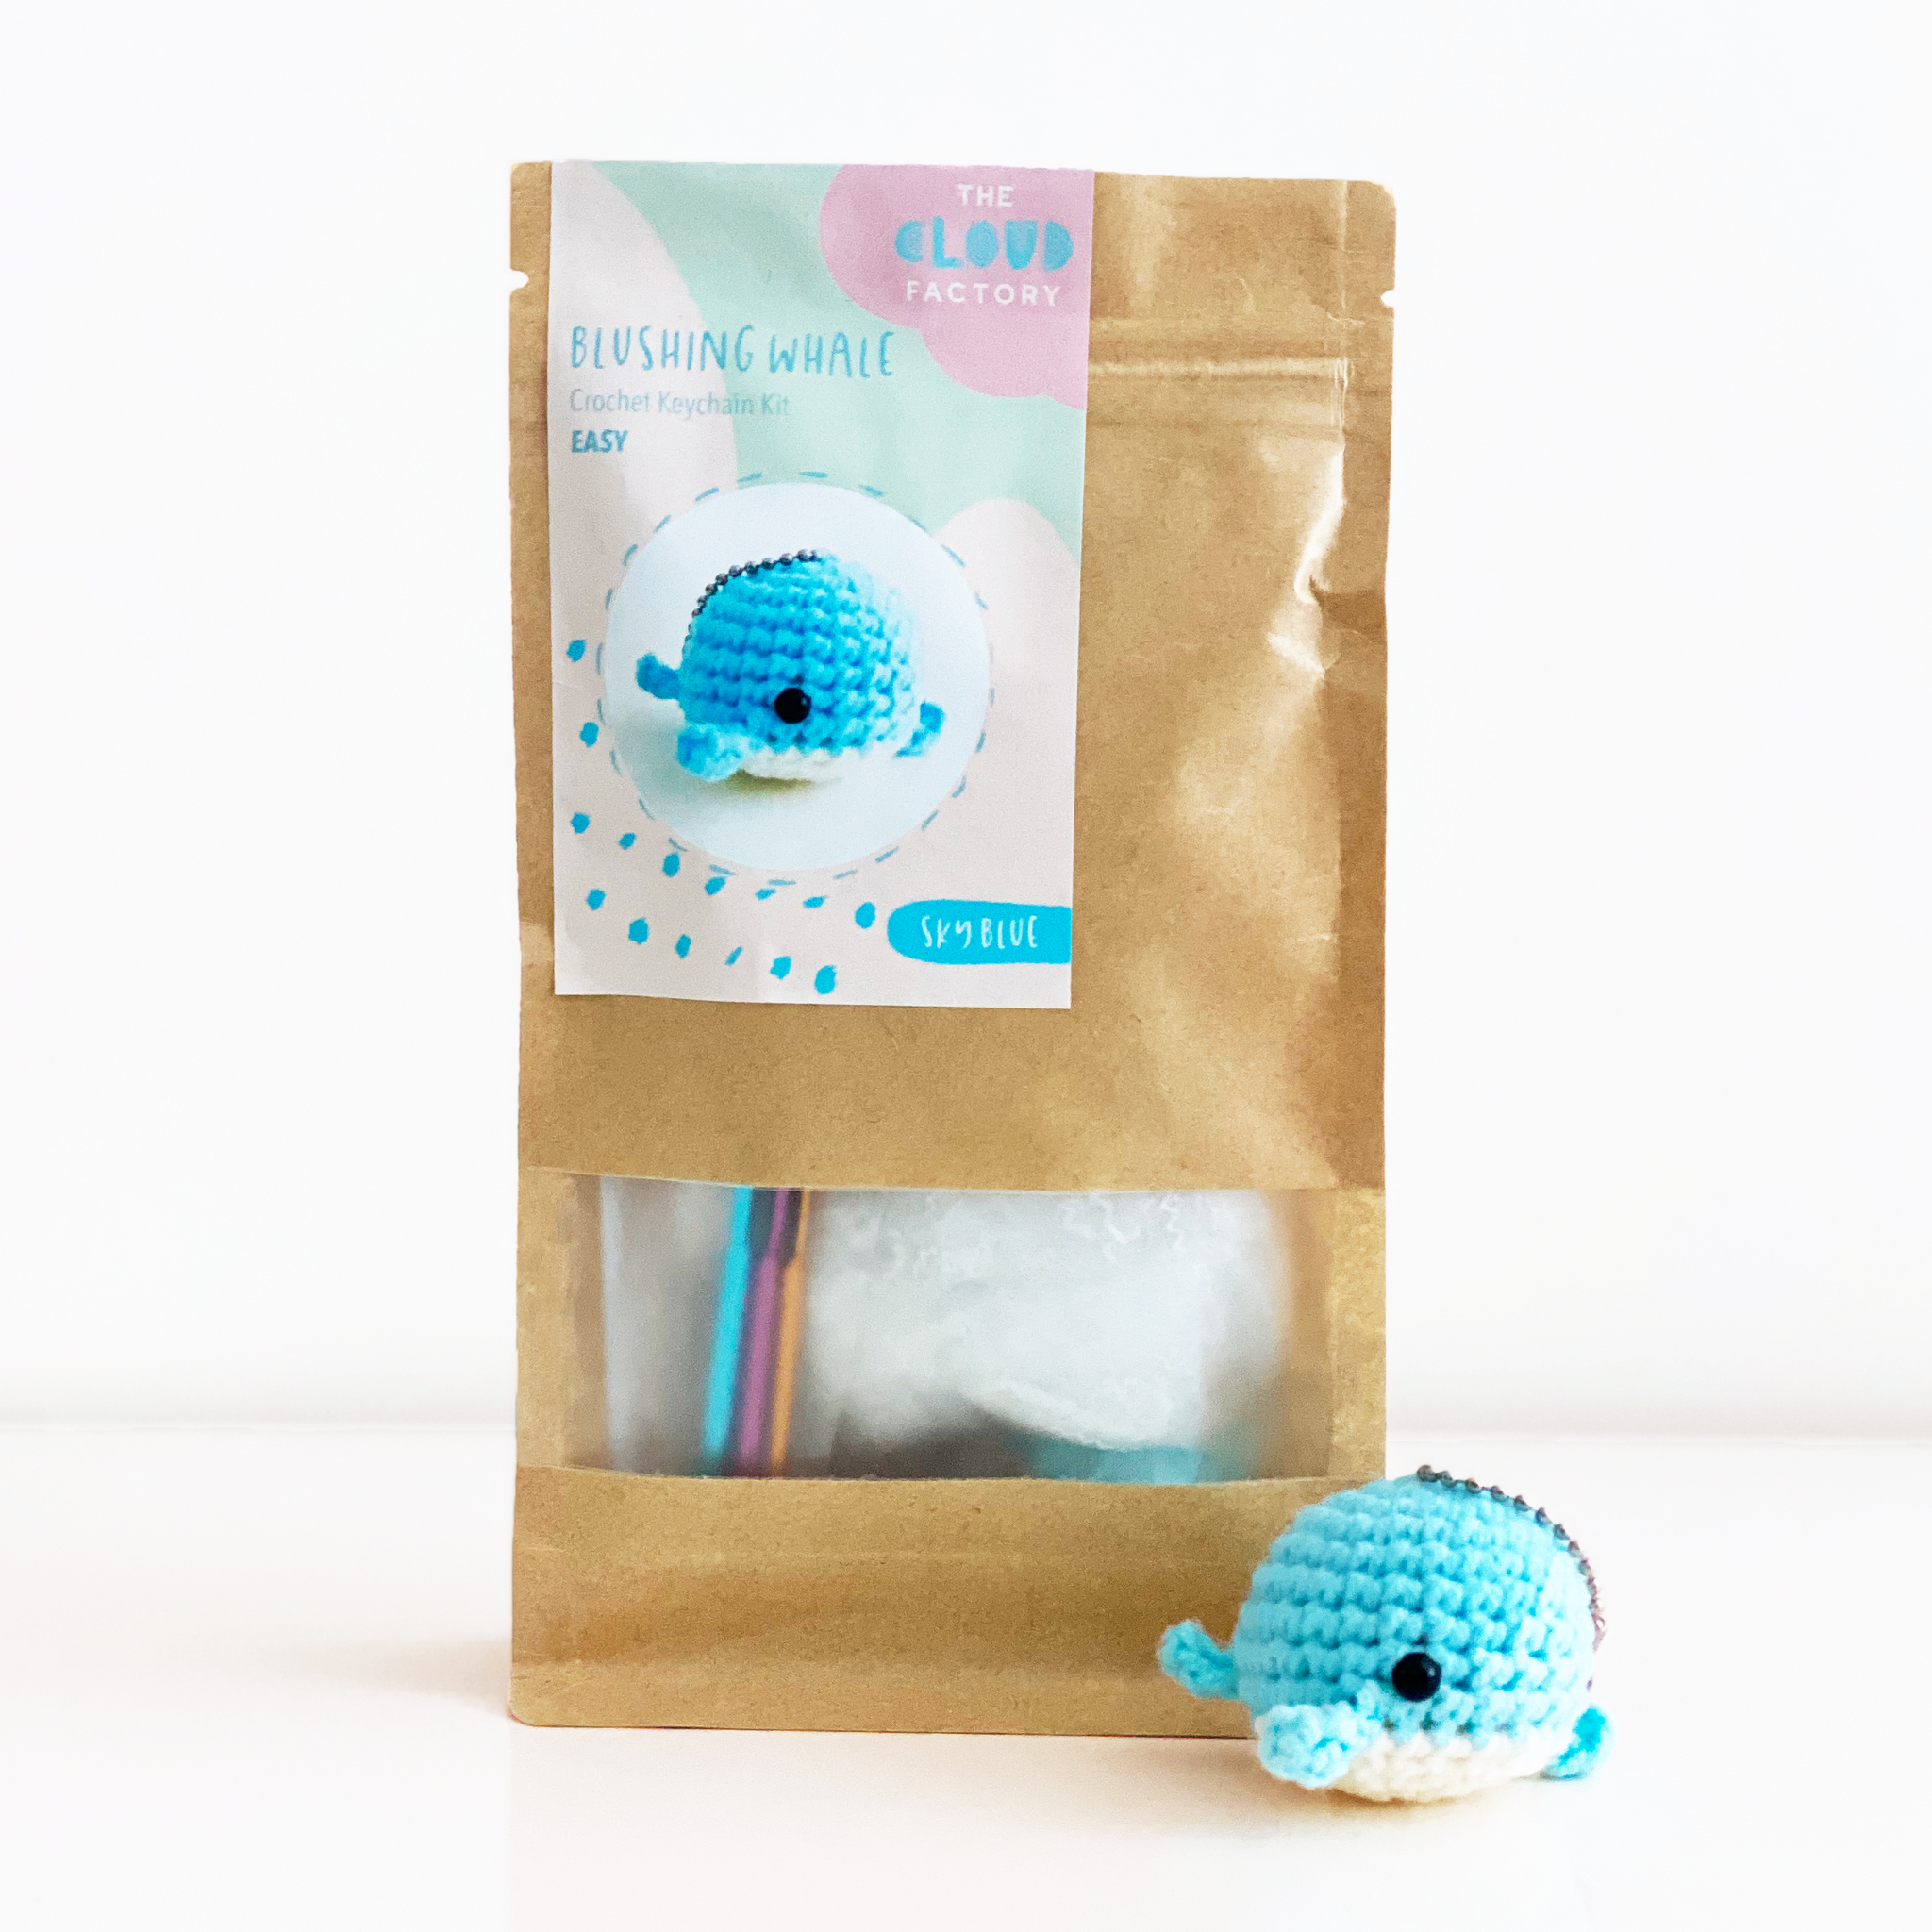 Crochet Keychain Kit Blushing Whale The Cloud Factory TheCloudFactory DIY Craft Kit Sky Blue Easy Crafting Beginner